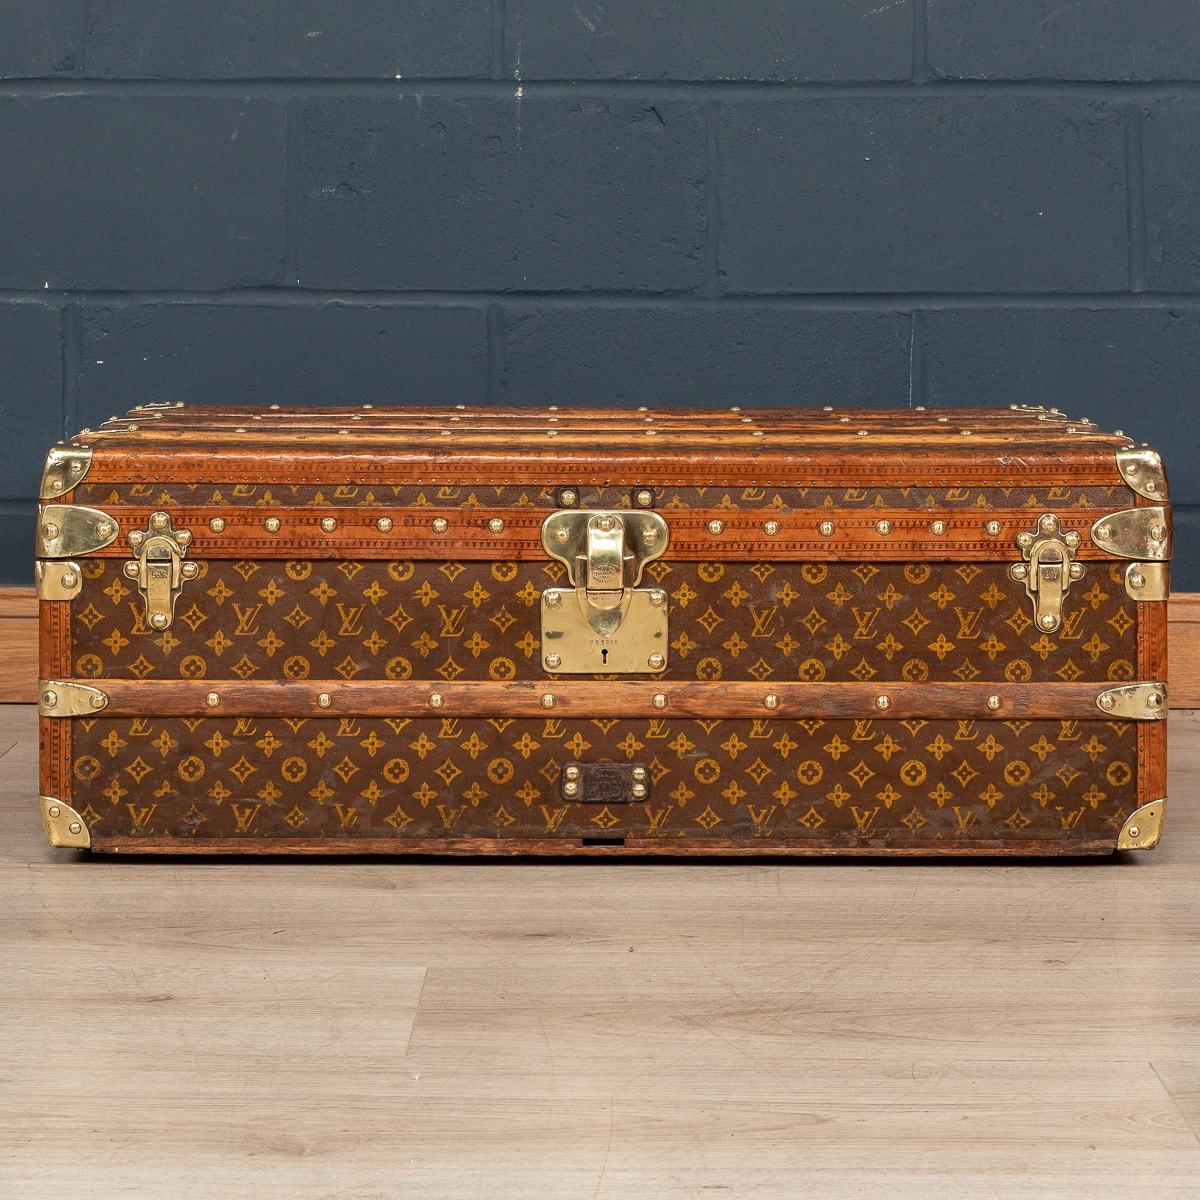 This example is a Louis Vuitton trunk that dates to around 1910. It is covered in the world famous LV monogrammed canvas, with its leather borders and brass fittings this trunk would have been the top of the line even at the time of purchase over